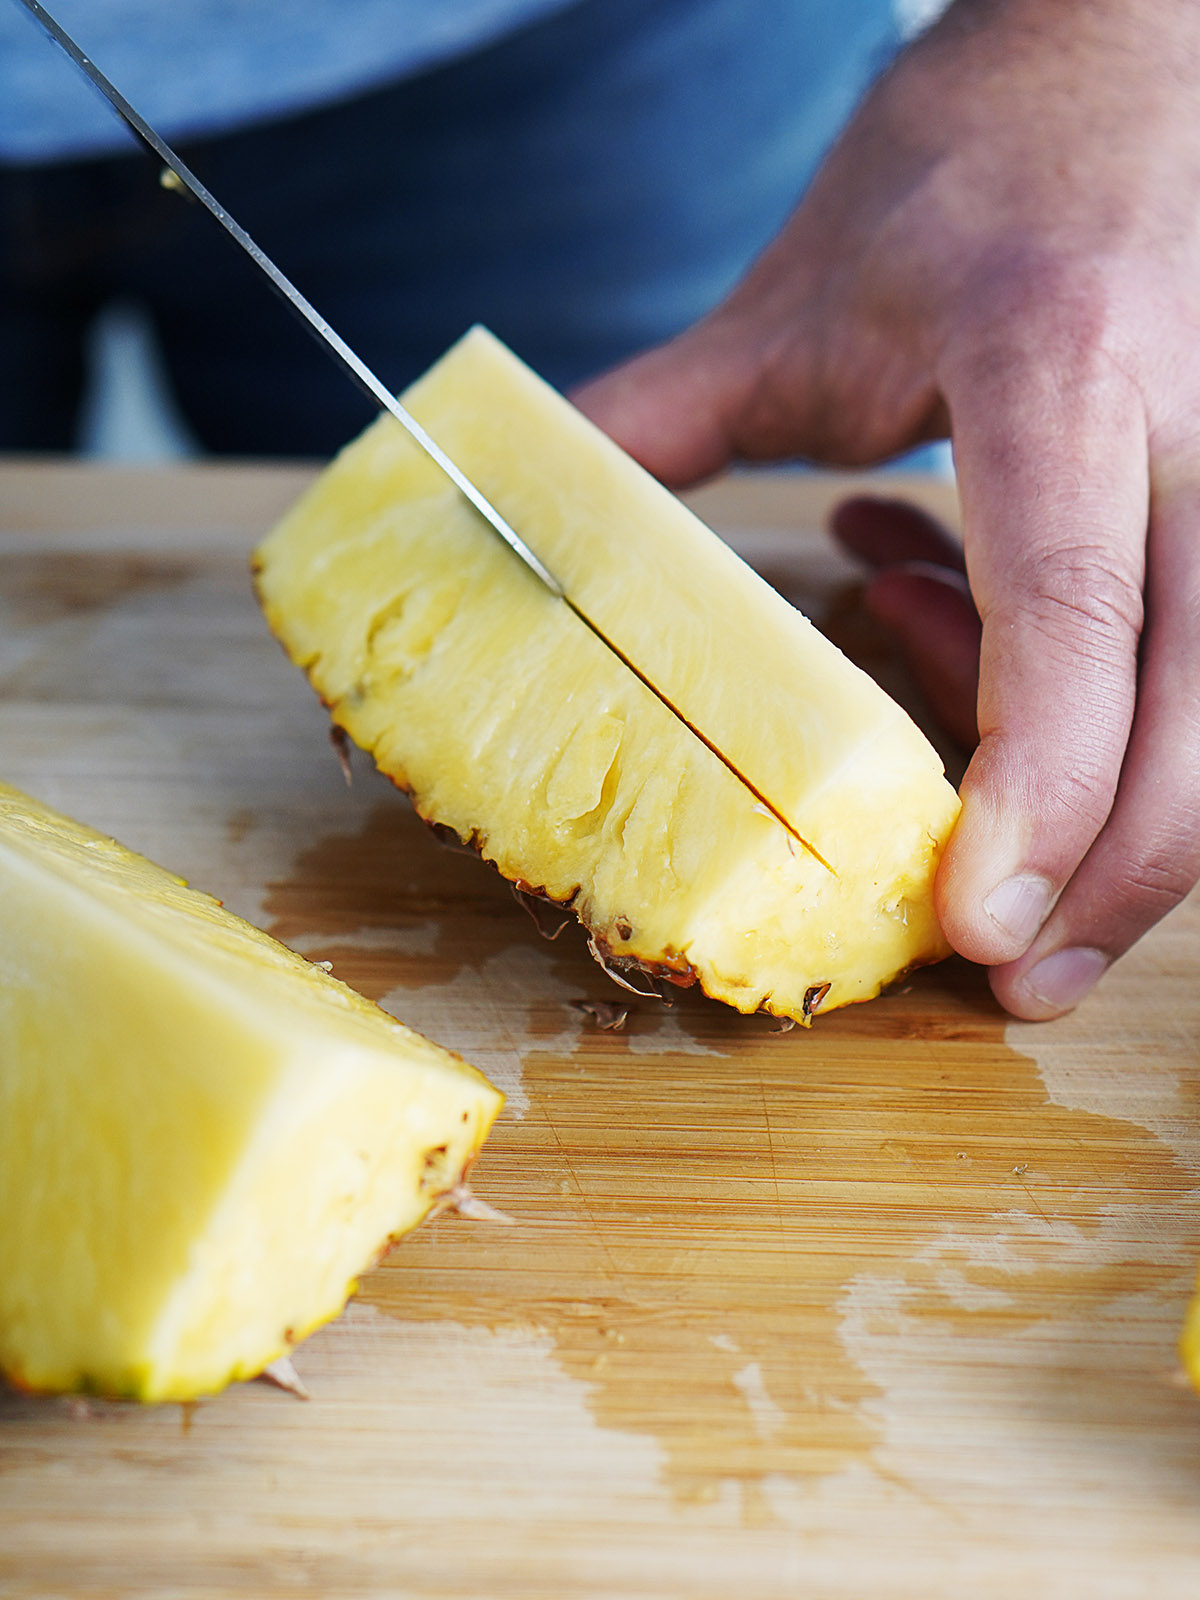 A person showing how to slice a pineapple.